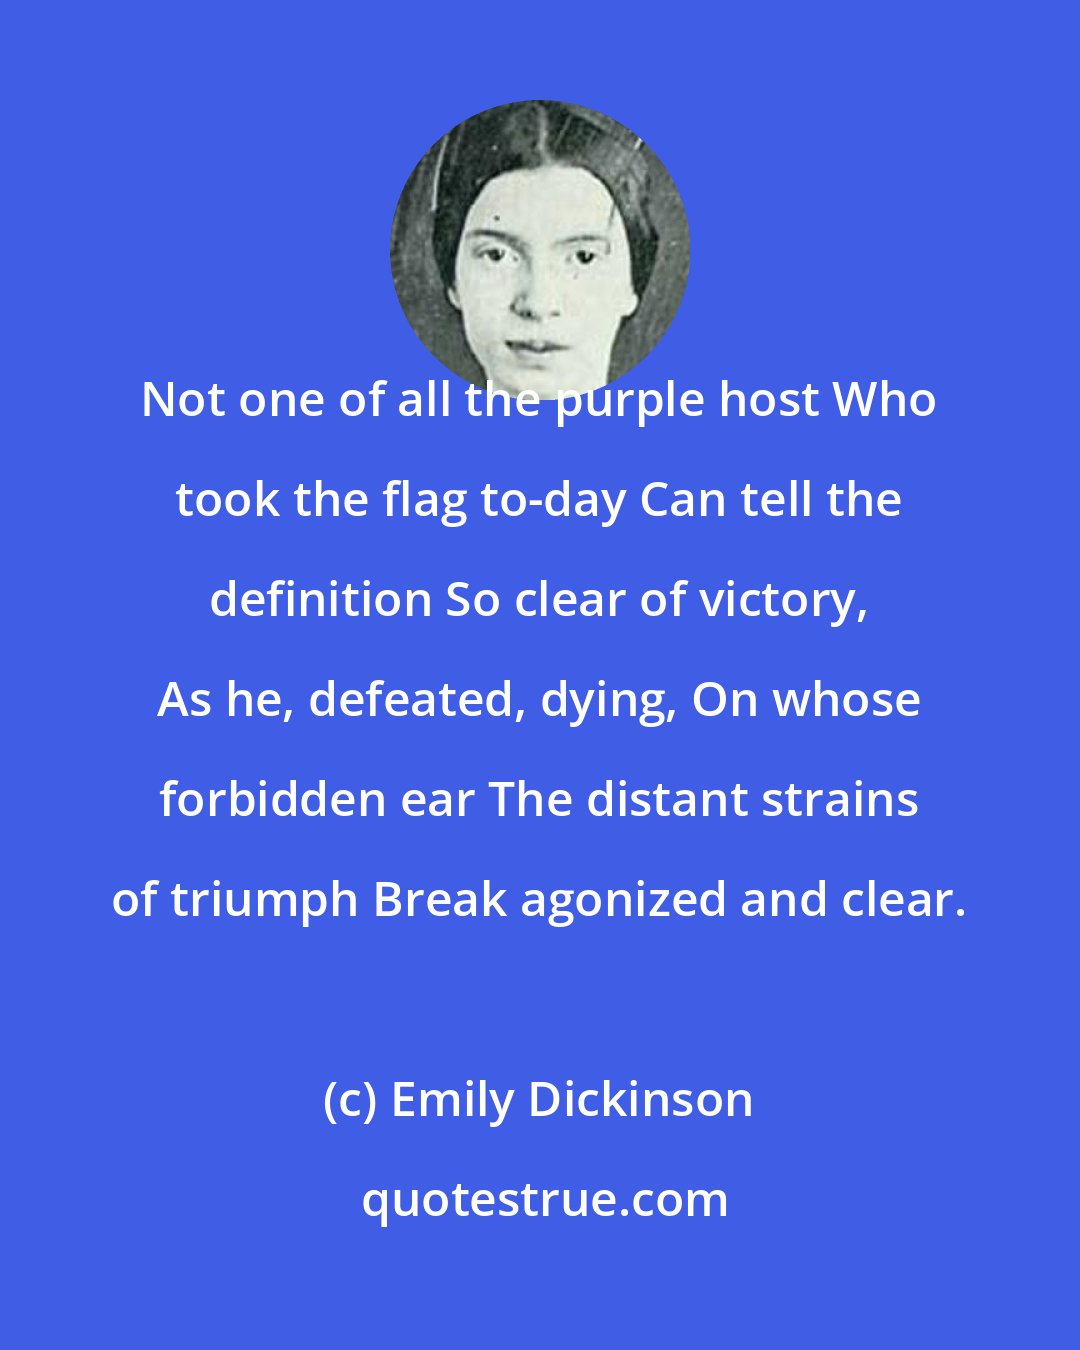 Emily Dickinson: Not one of all the purple host Who took the flag to-day Can tell the definition So clear of victory, As he, defeated, dying, On whose forbidden ear The distant strains of triumph Break agonized and clear.